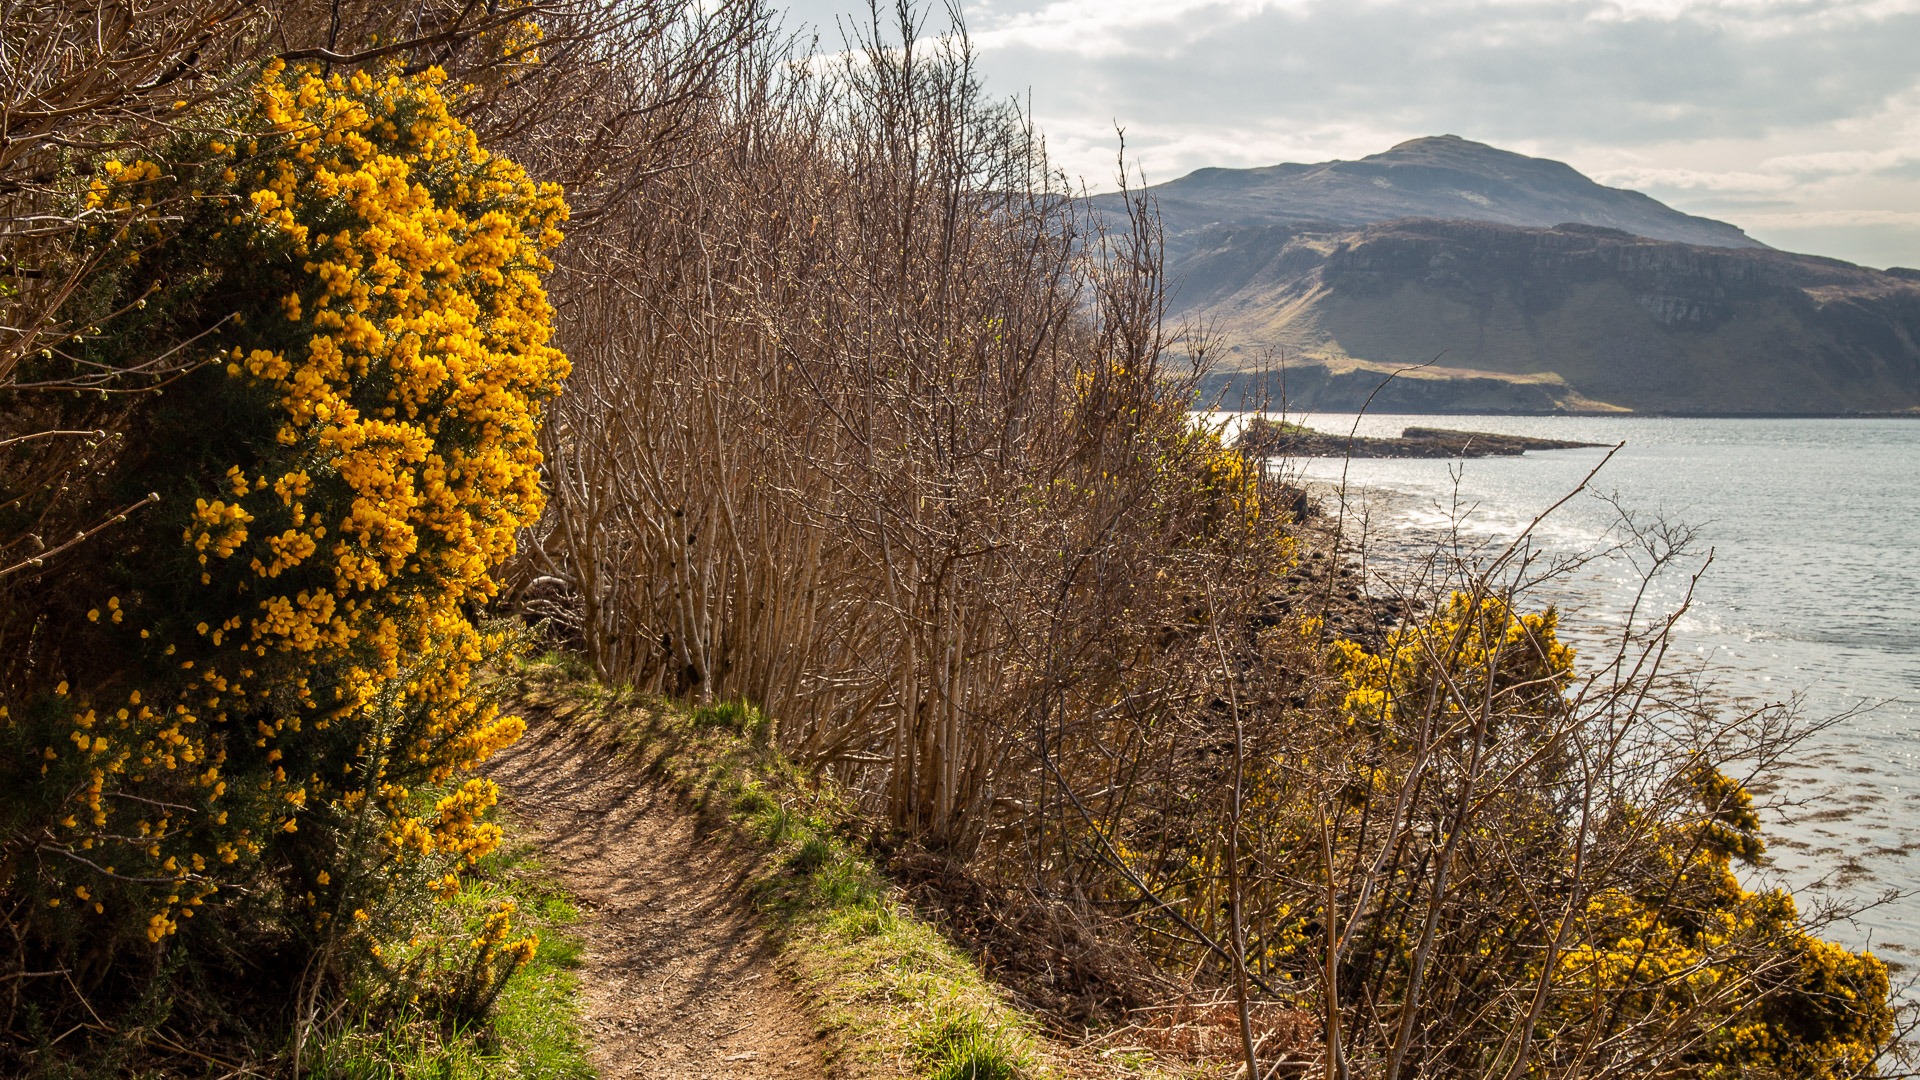 Gorse by the wayside